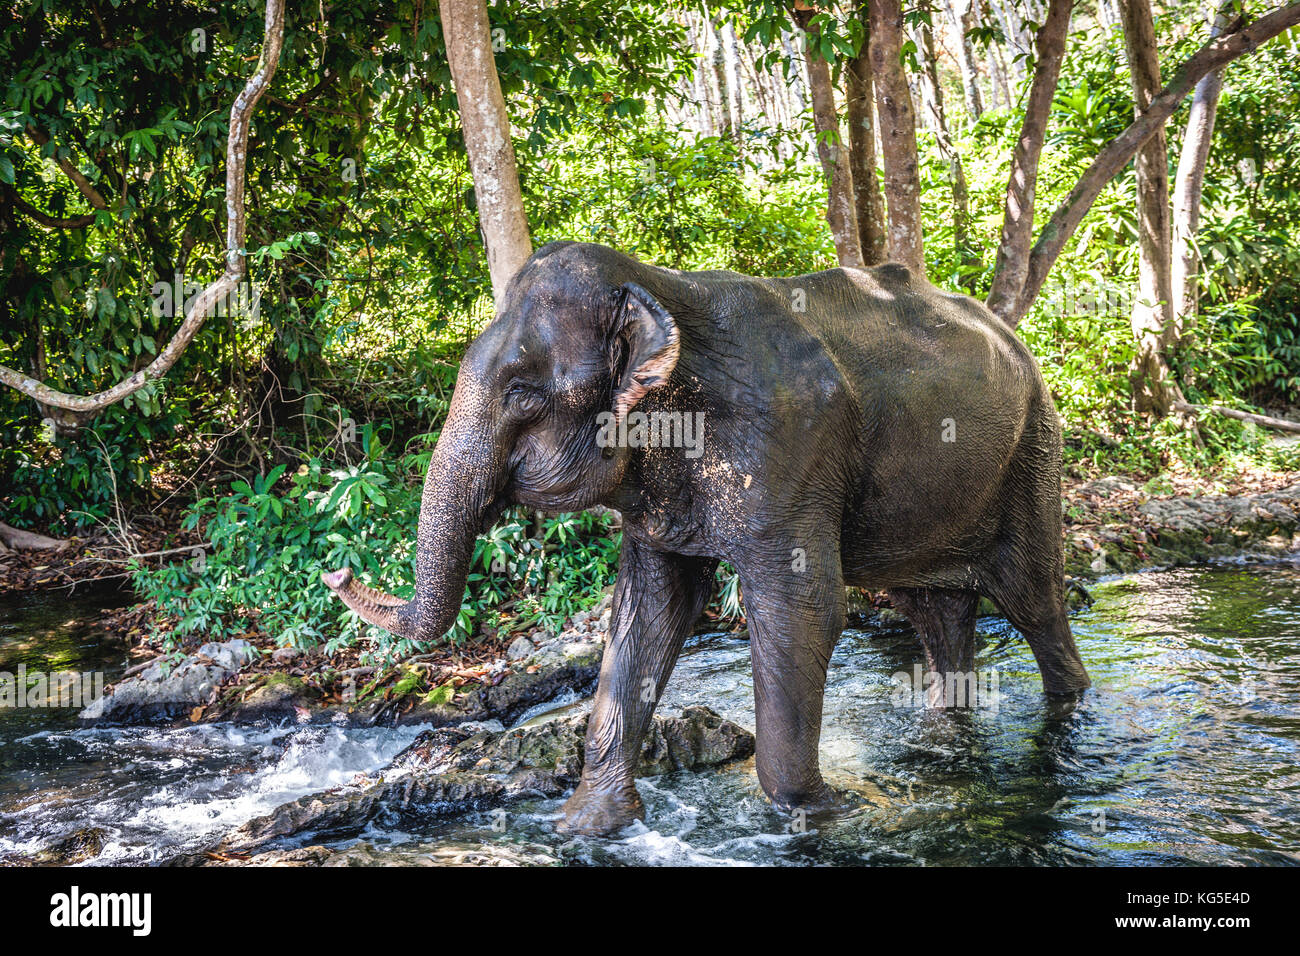 An adult Asian or Asiatic Elephant (Elephas maximus) bathing in a river in the jungles of Thailand Stock Photo